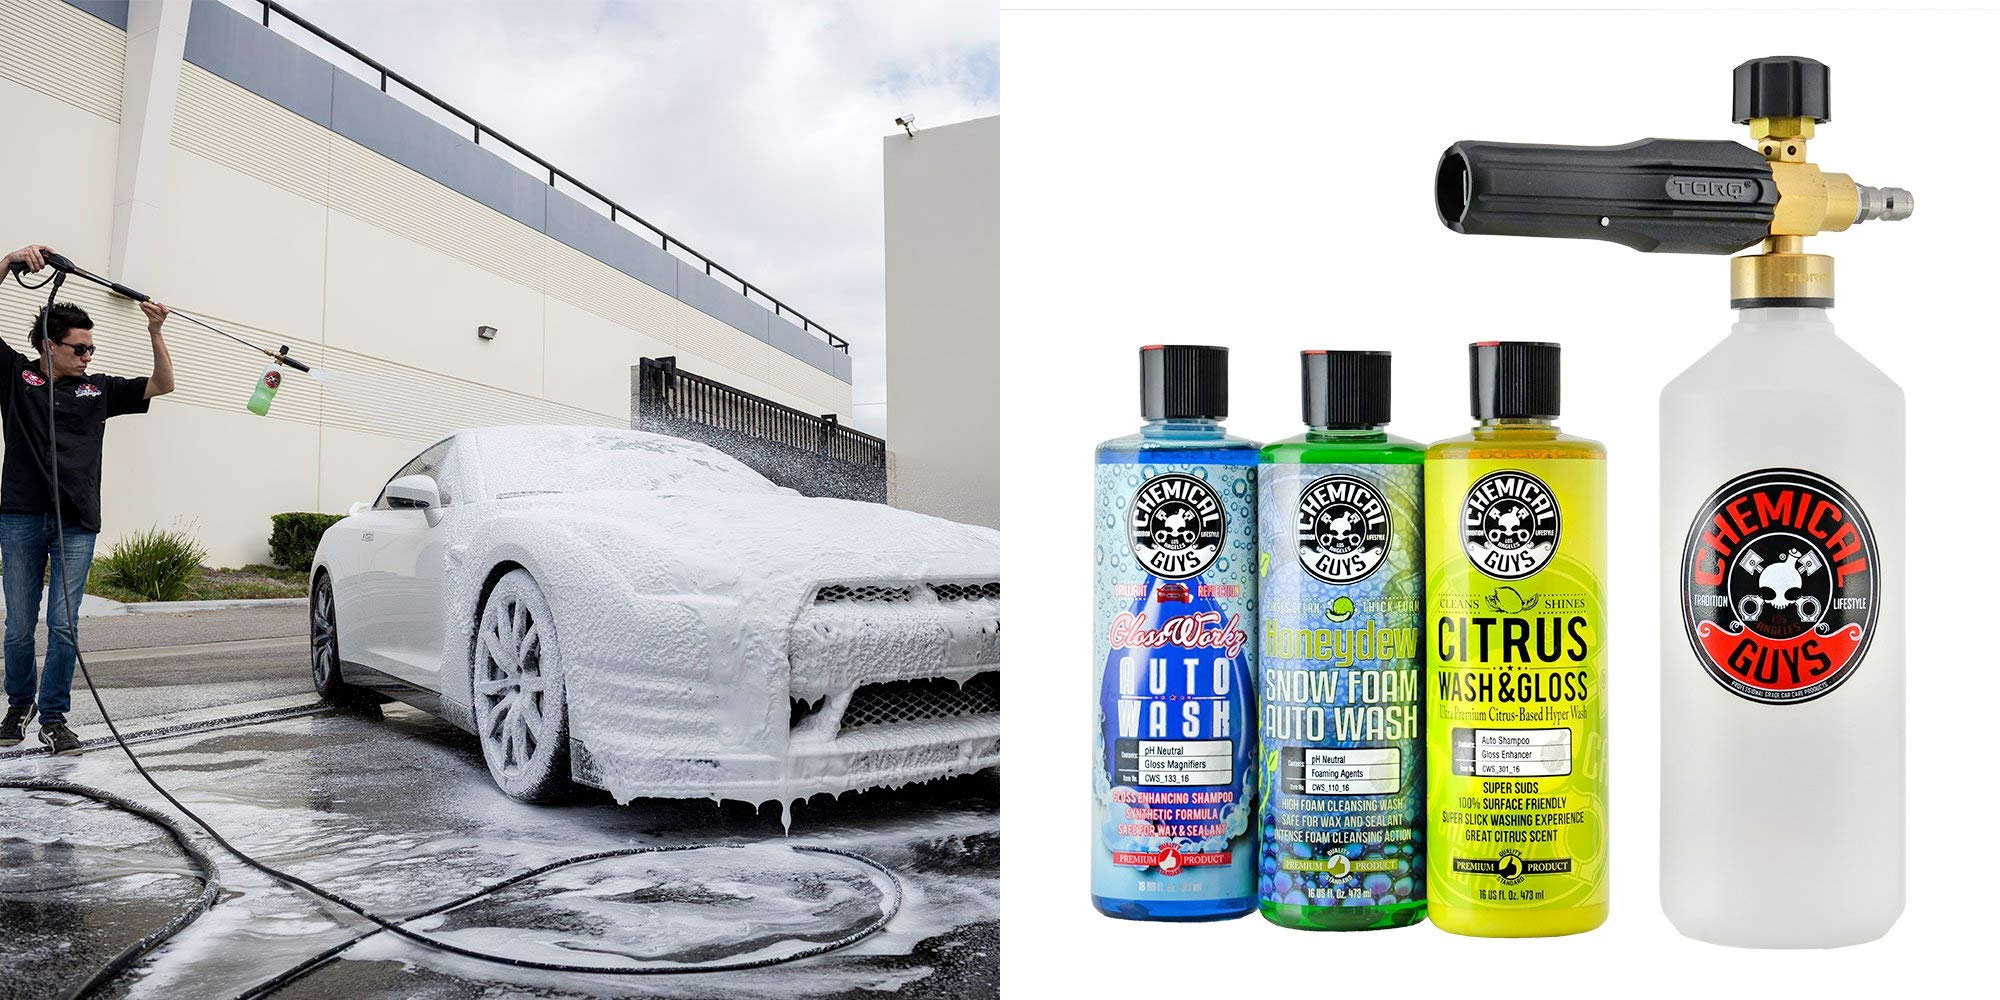 This Chemical Guys foam cannon + soap is a perfect buy to wash your car ...